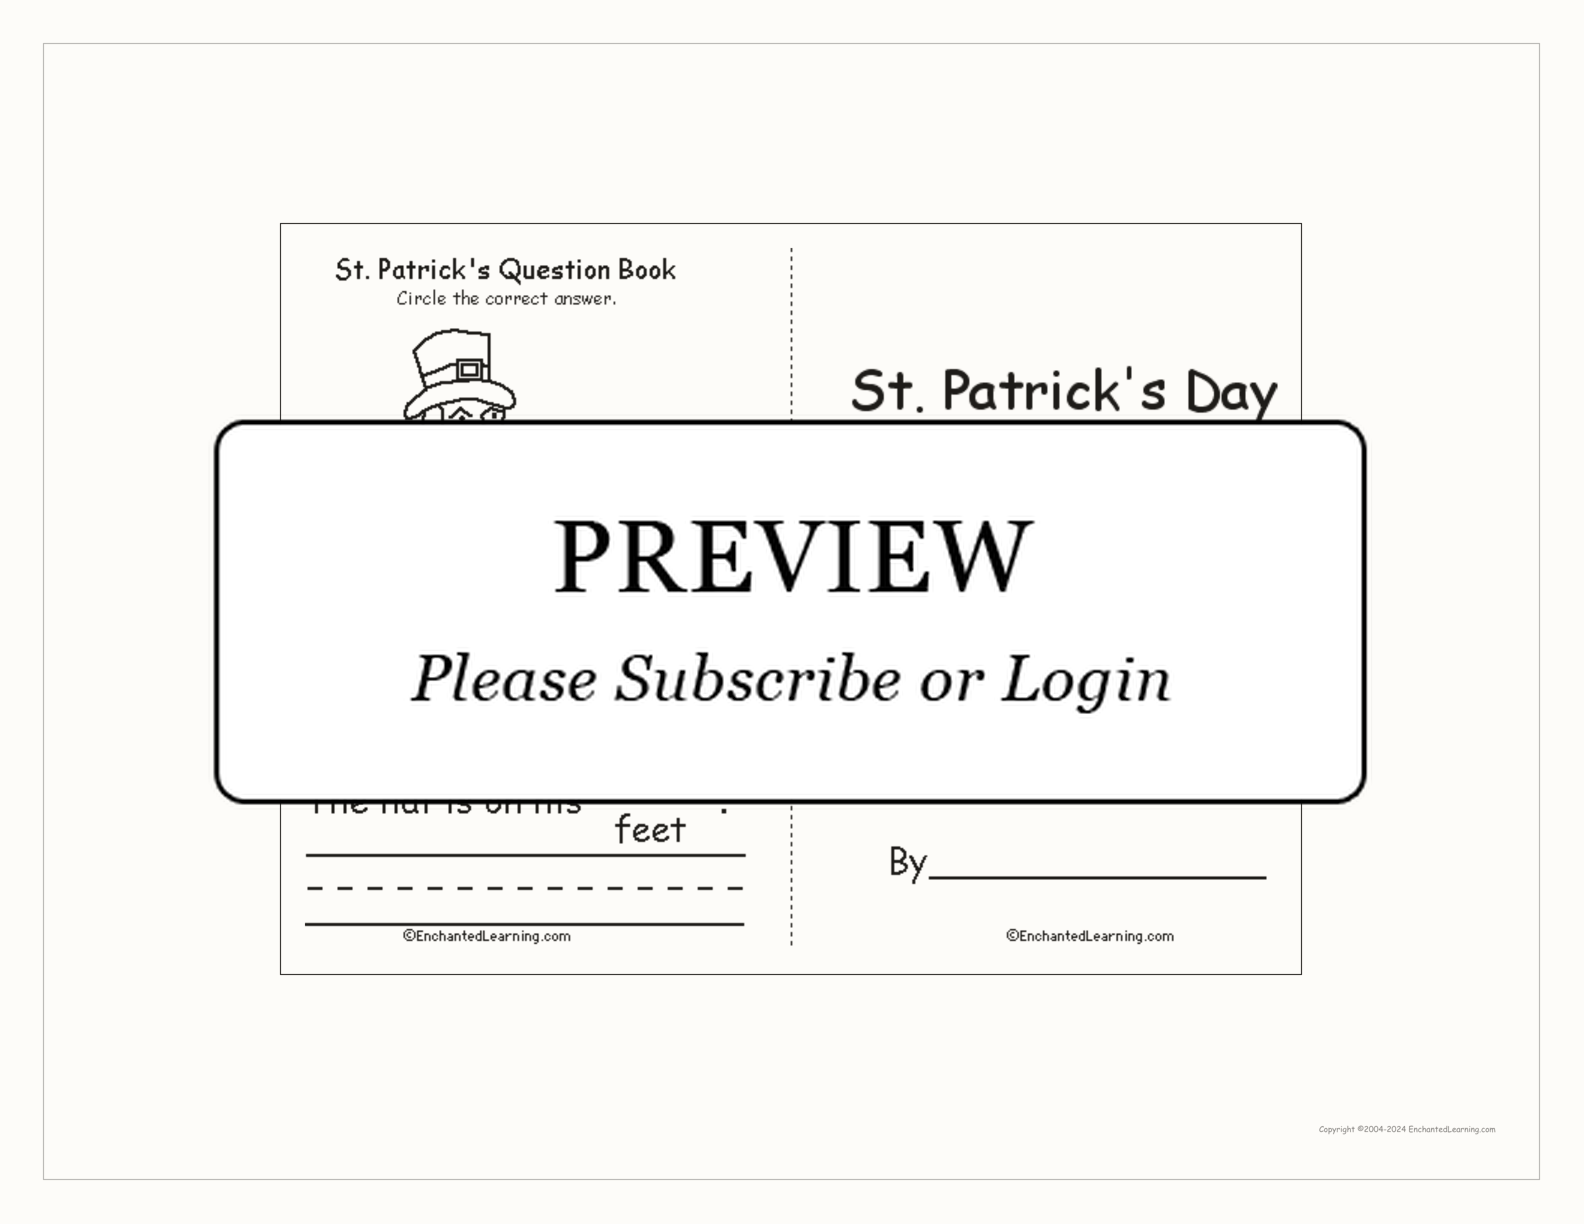 St. Patrick's Question Book interactive worksheet page 1